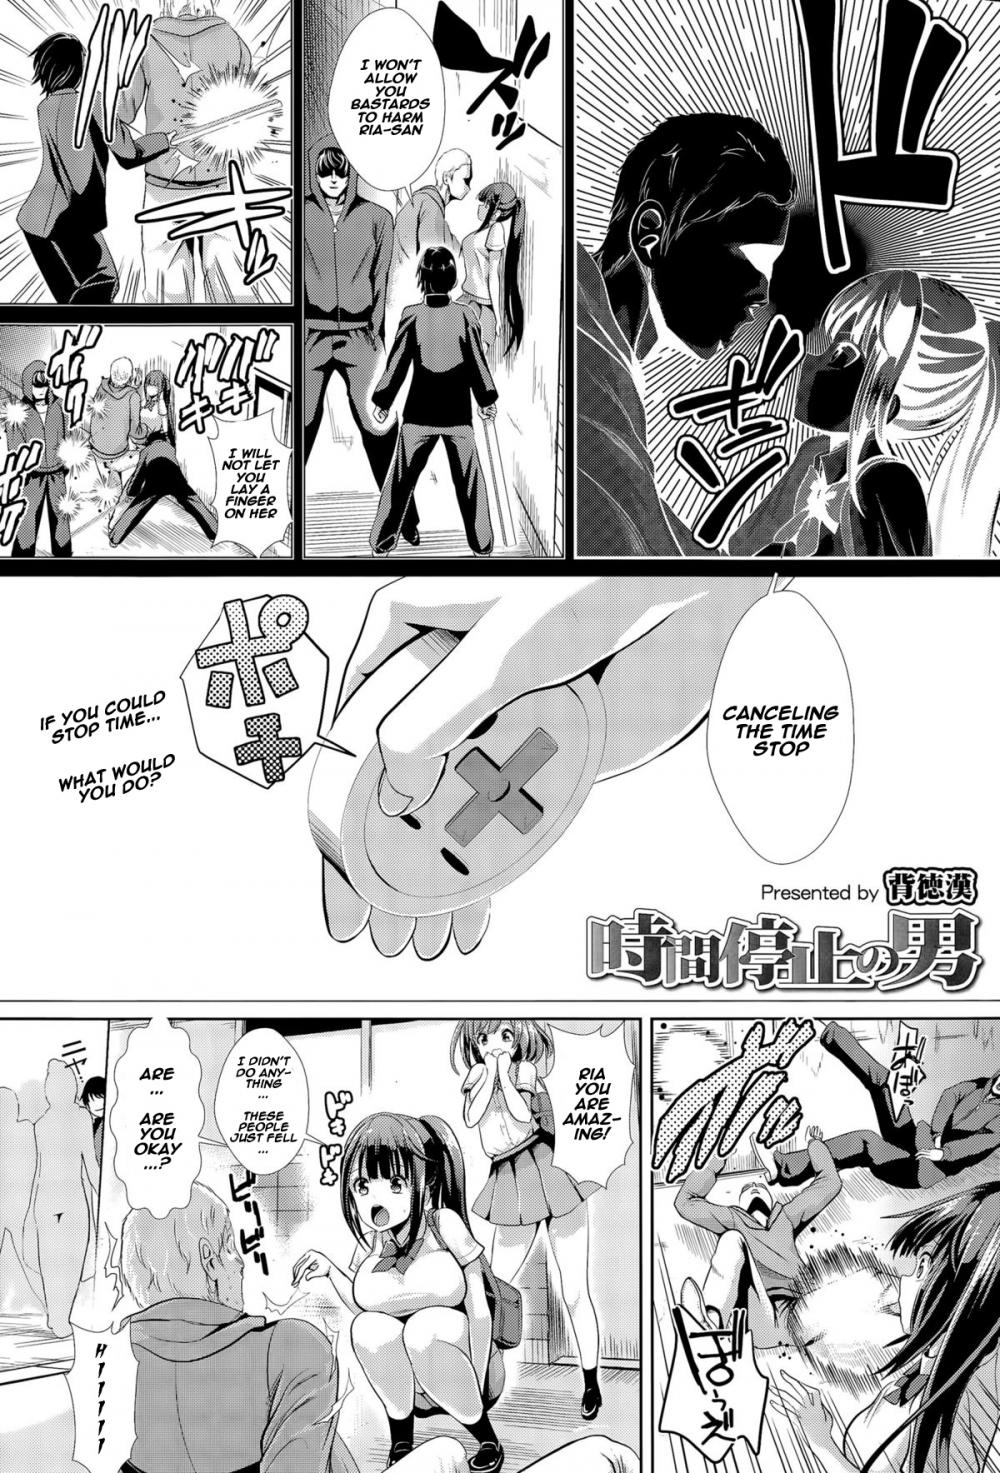 Hentai Manga Comic-The journal of the man who could stop time-Read-2